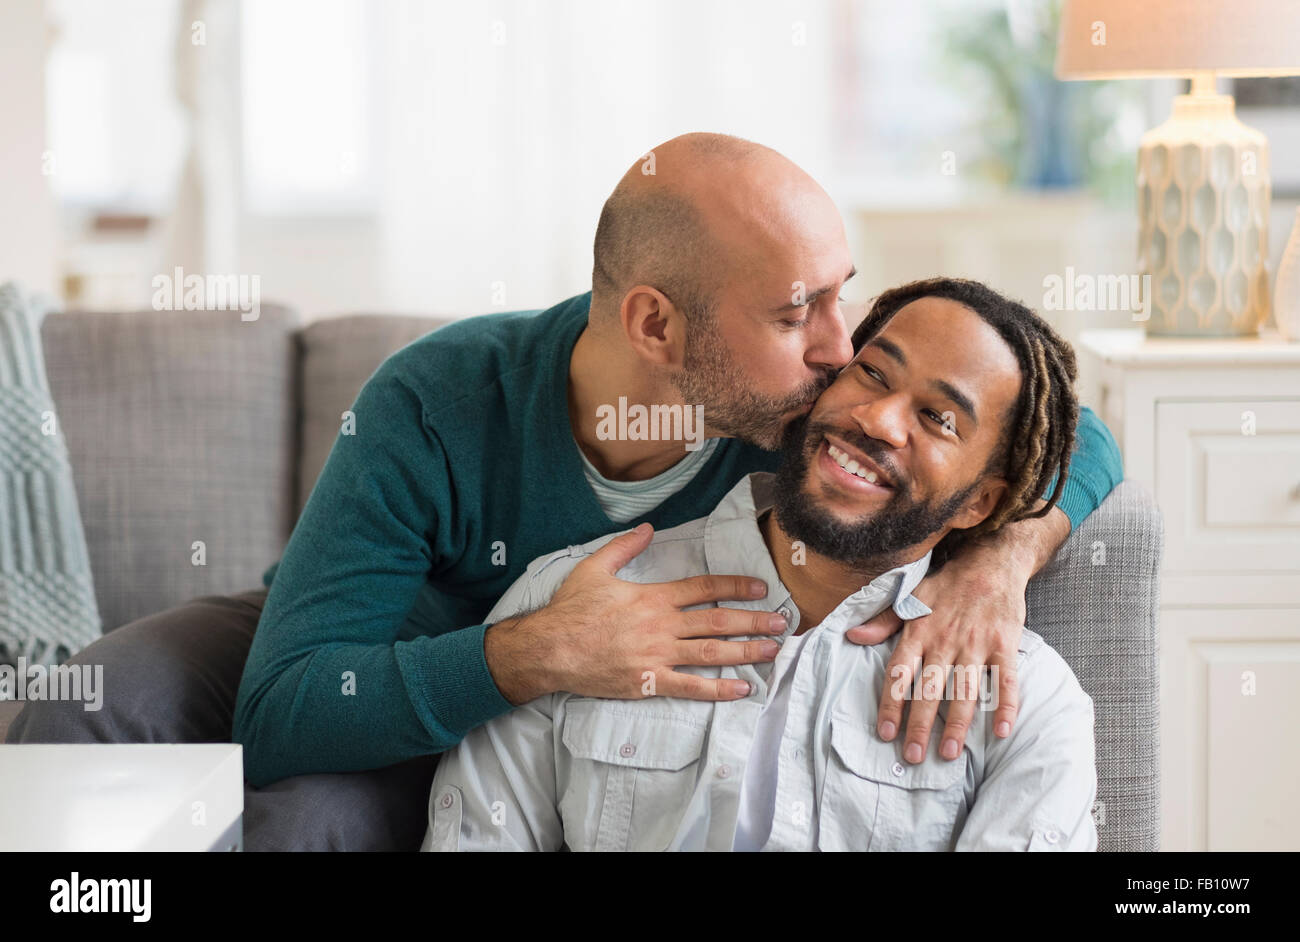 Homosexual couple kissing by sofa in living room Stock Photo